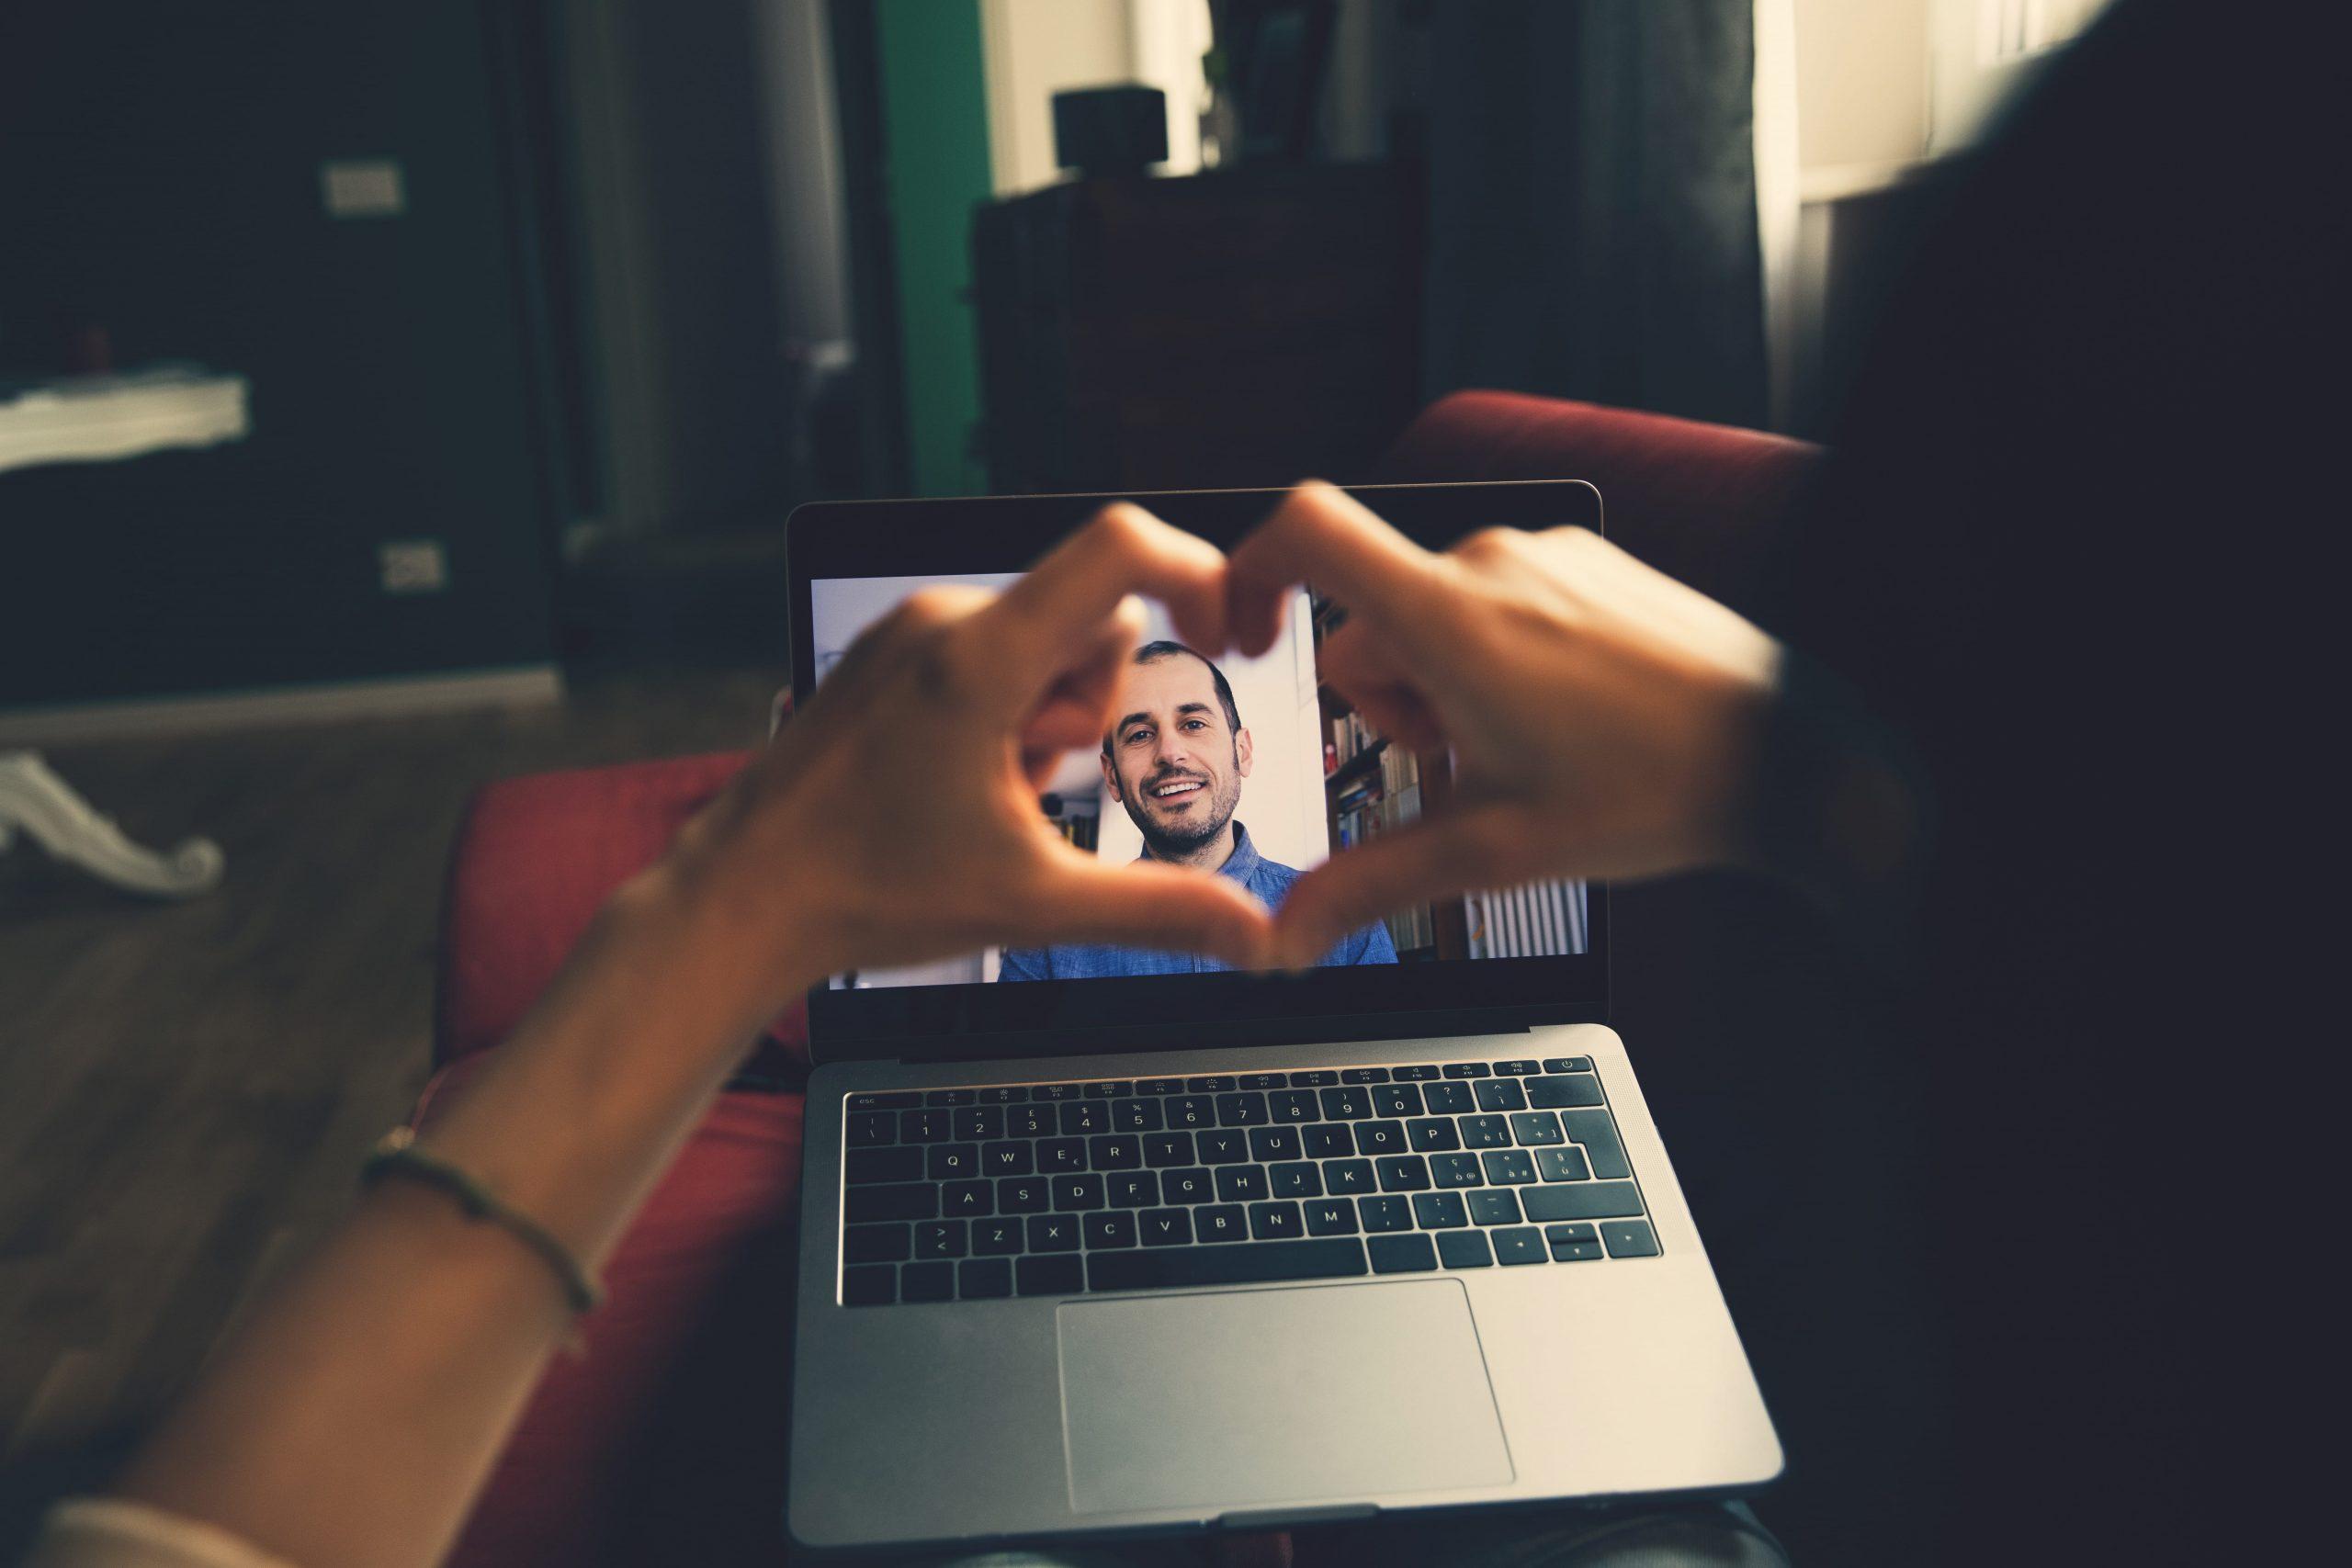 How to Add More Romance to Your Virtual Dates